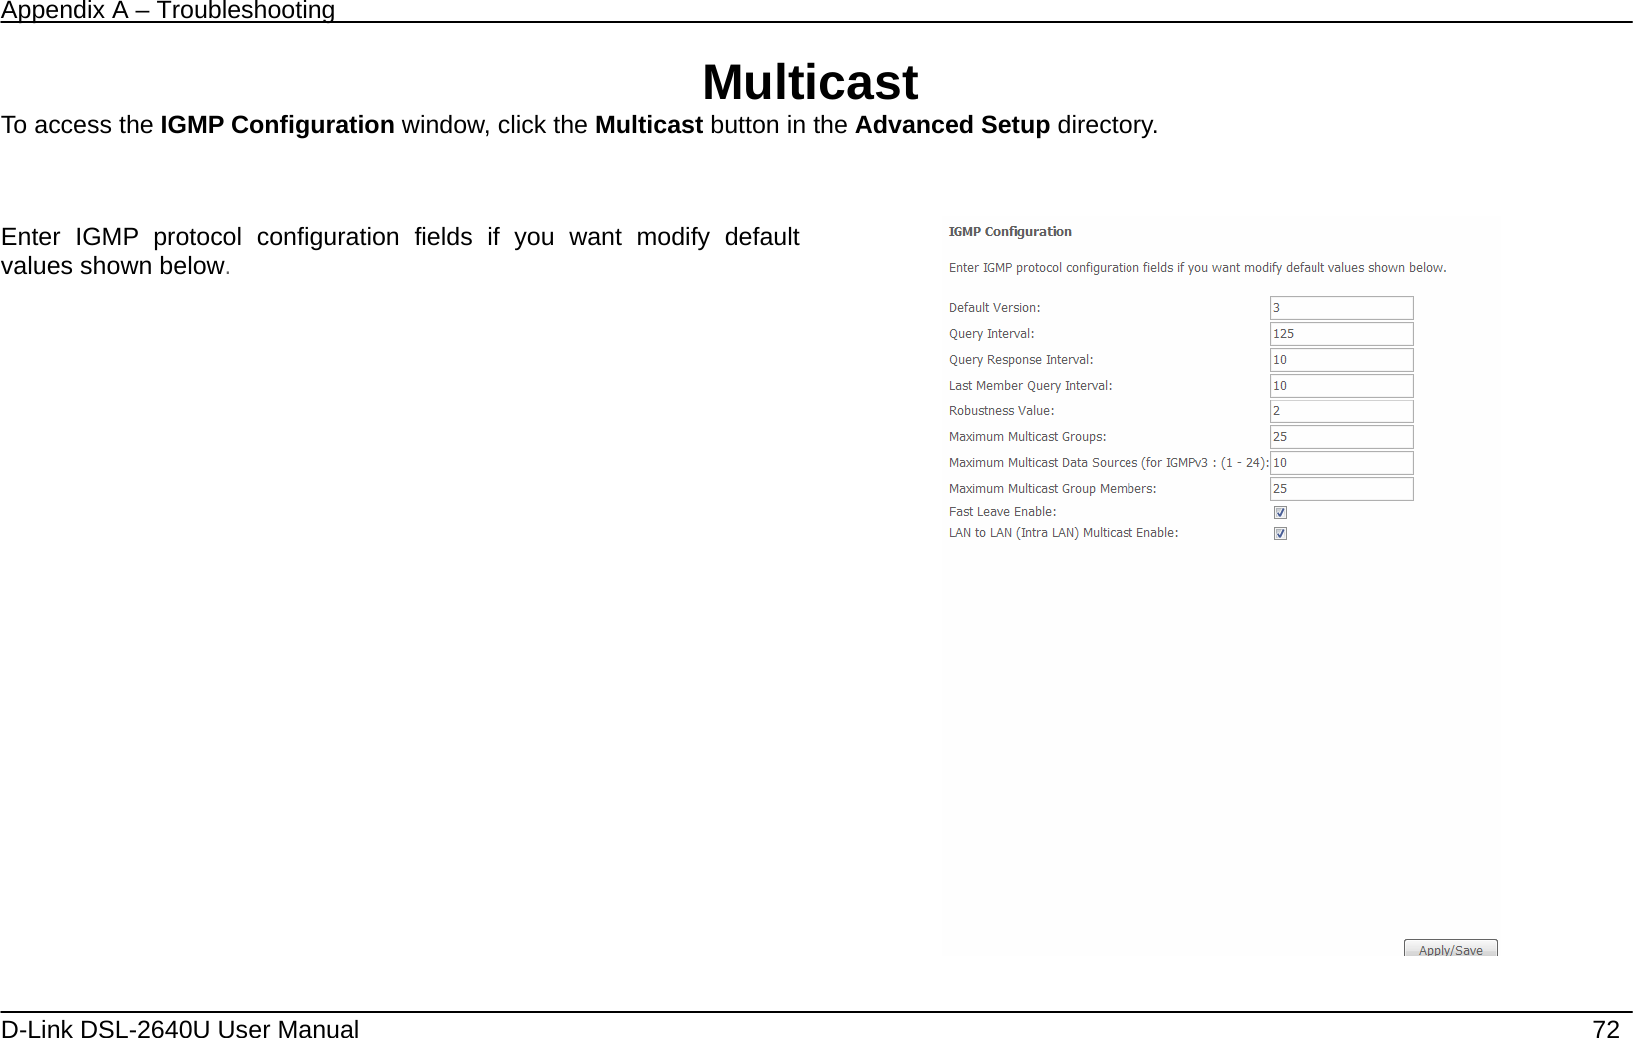 Appendix A – Troubleshooting   D-Link DSL-2640U User Manual    72 Multicast To access the IGMP Configuration window, click the Multicast button in the Advanced Setup directory.   Enter IGMP protocol configuration fields if you want modify default values shown below.       